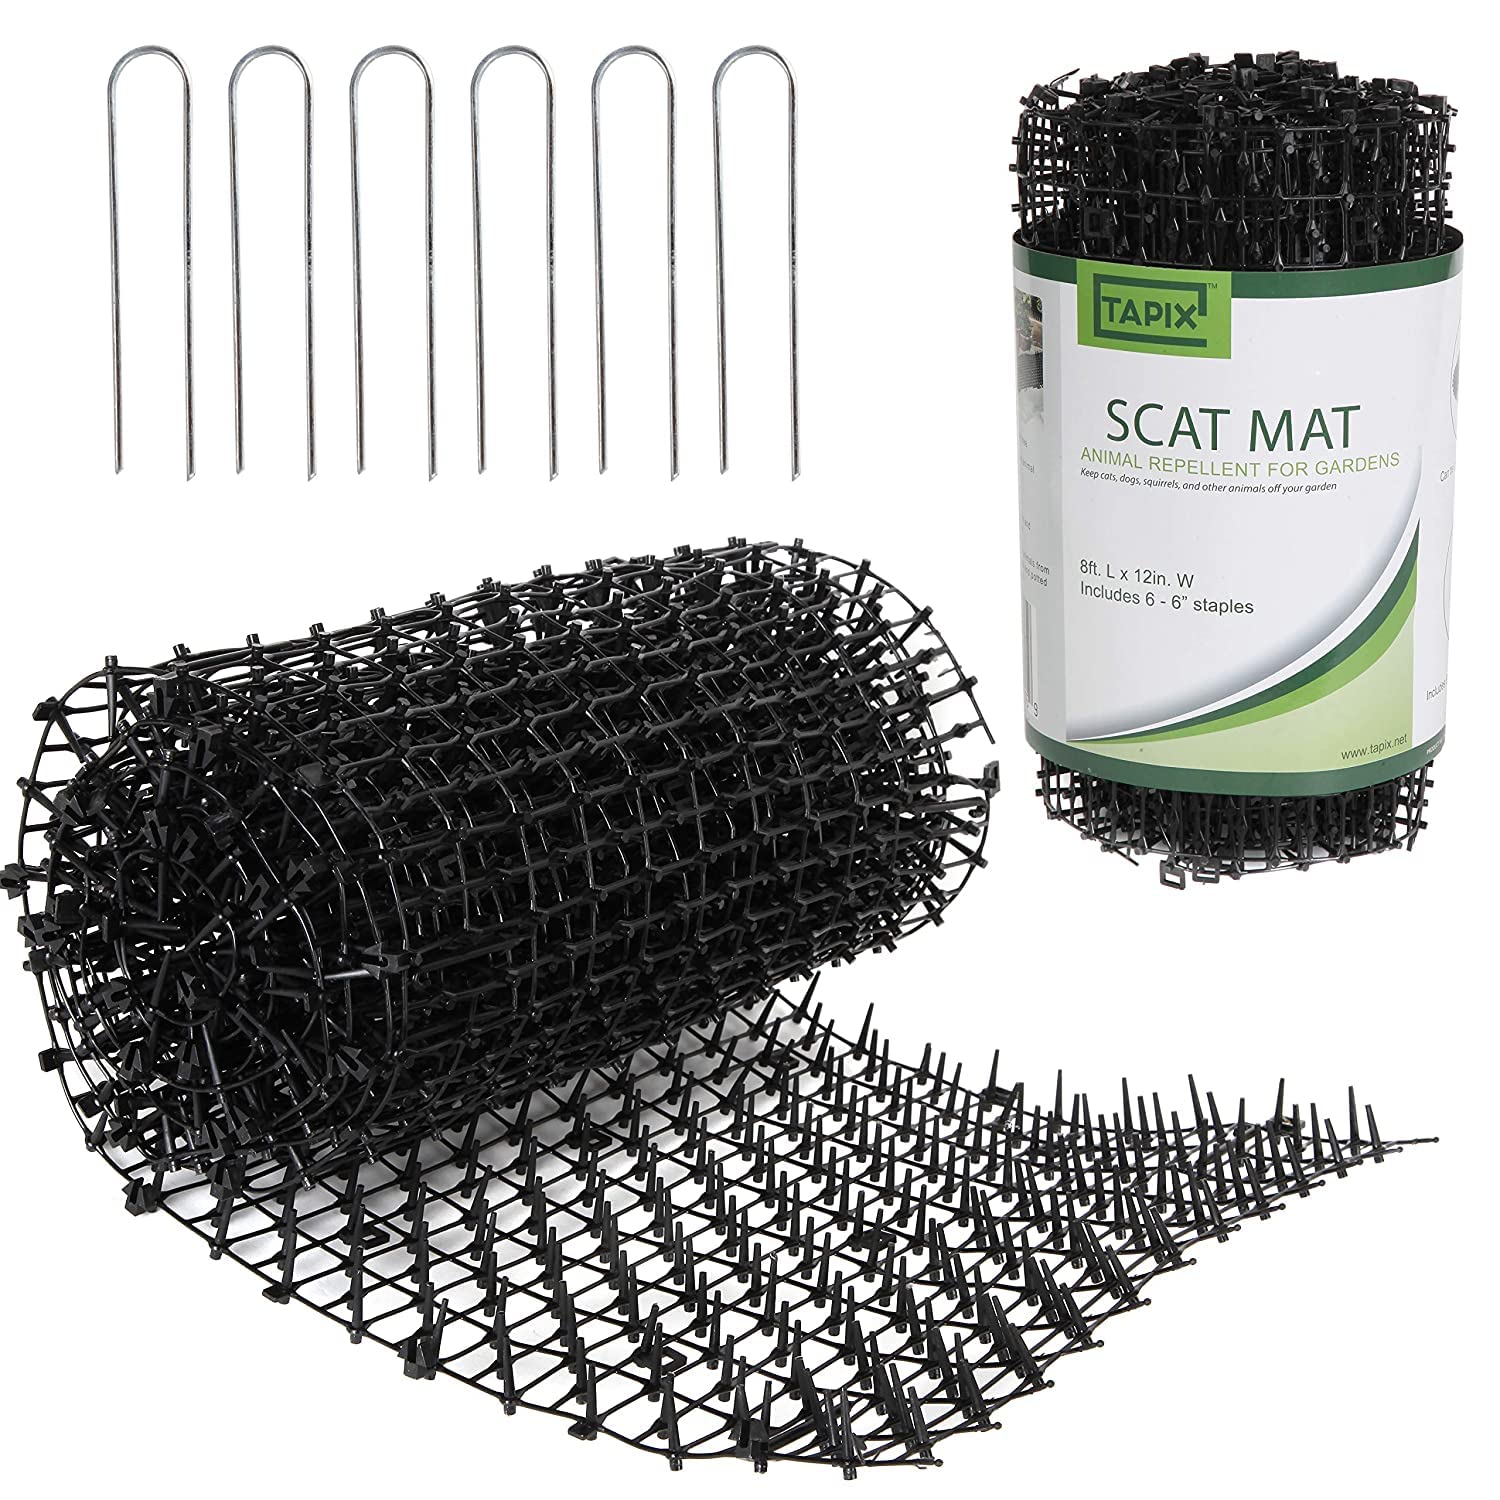 Spiked Mat Network Digging Stopper for Cats and Dogs